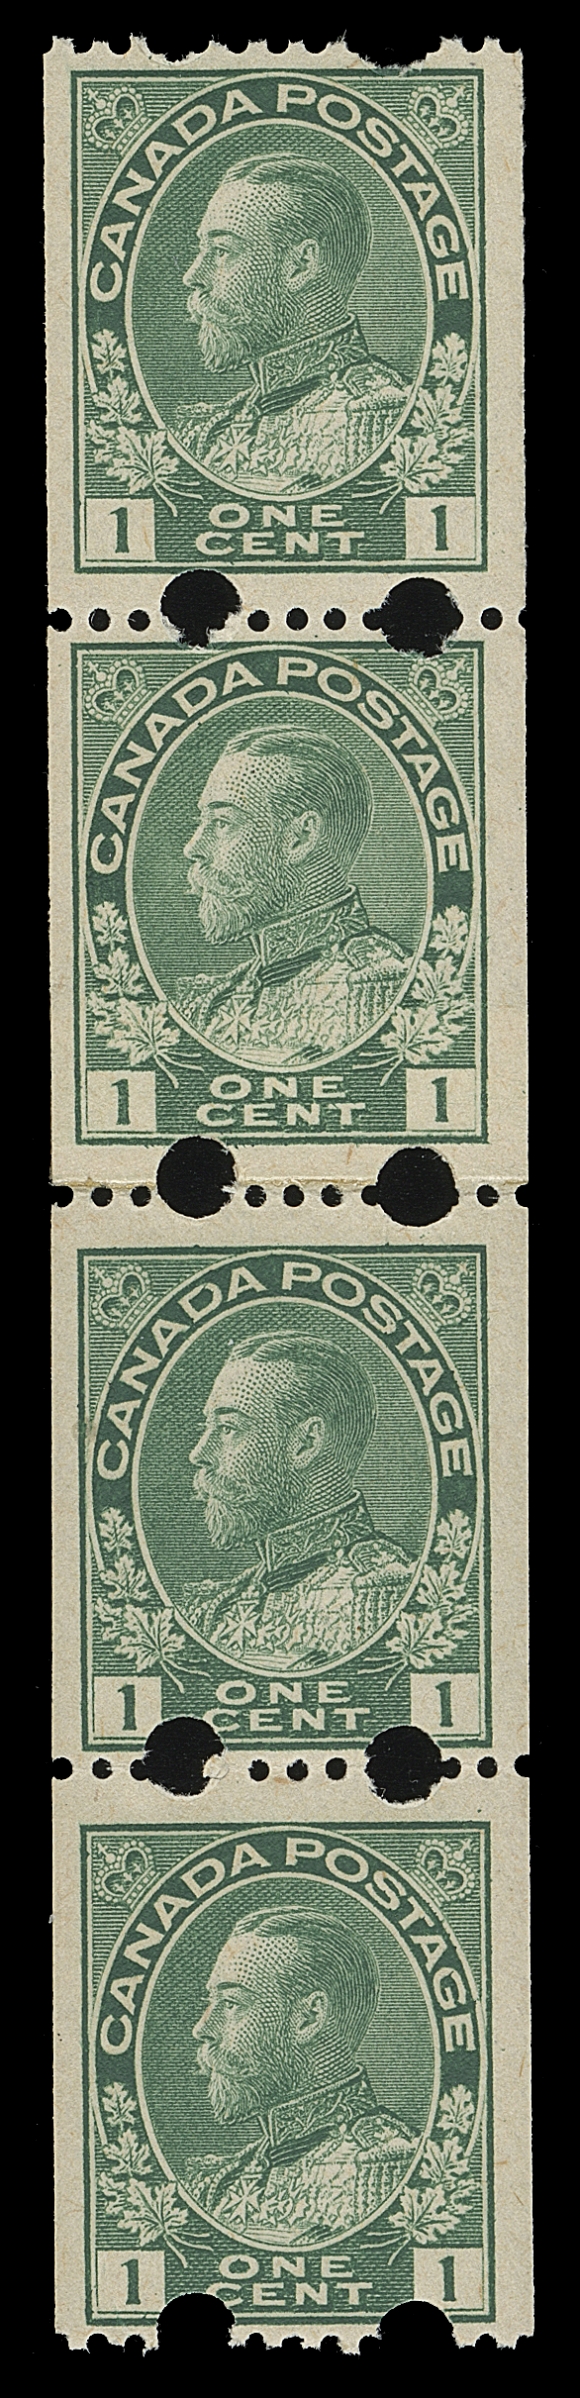 CANADA  131v,Experimental Toronto paste-up coil strip of four, well centered with brilliant fresh colour with full original gum, scarce this nice, VF NH